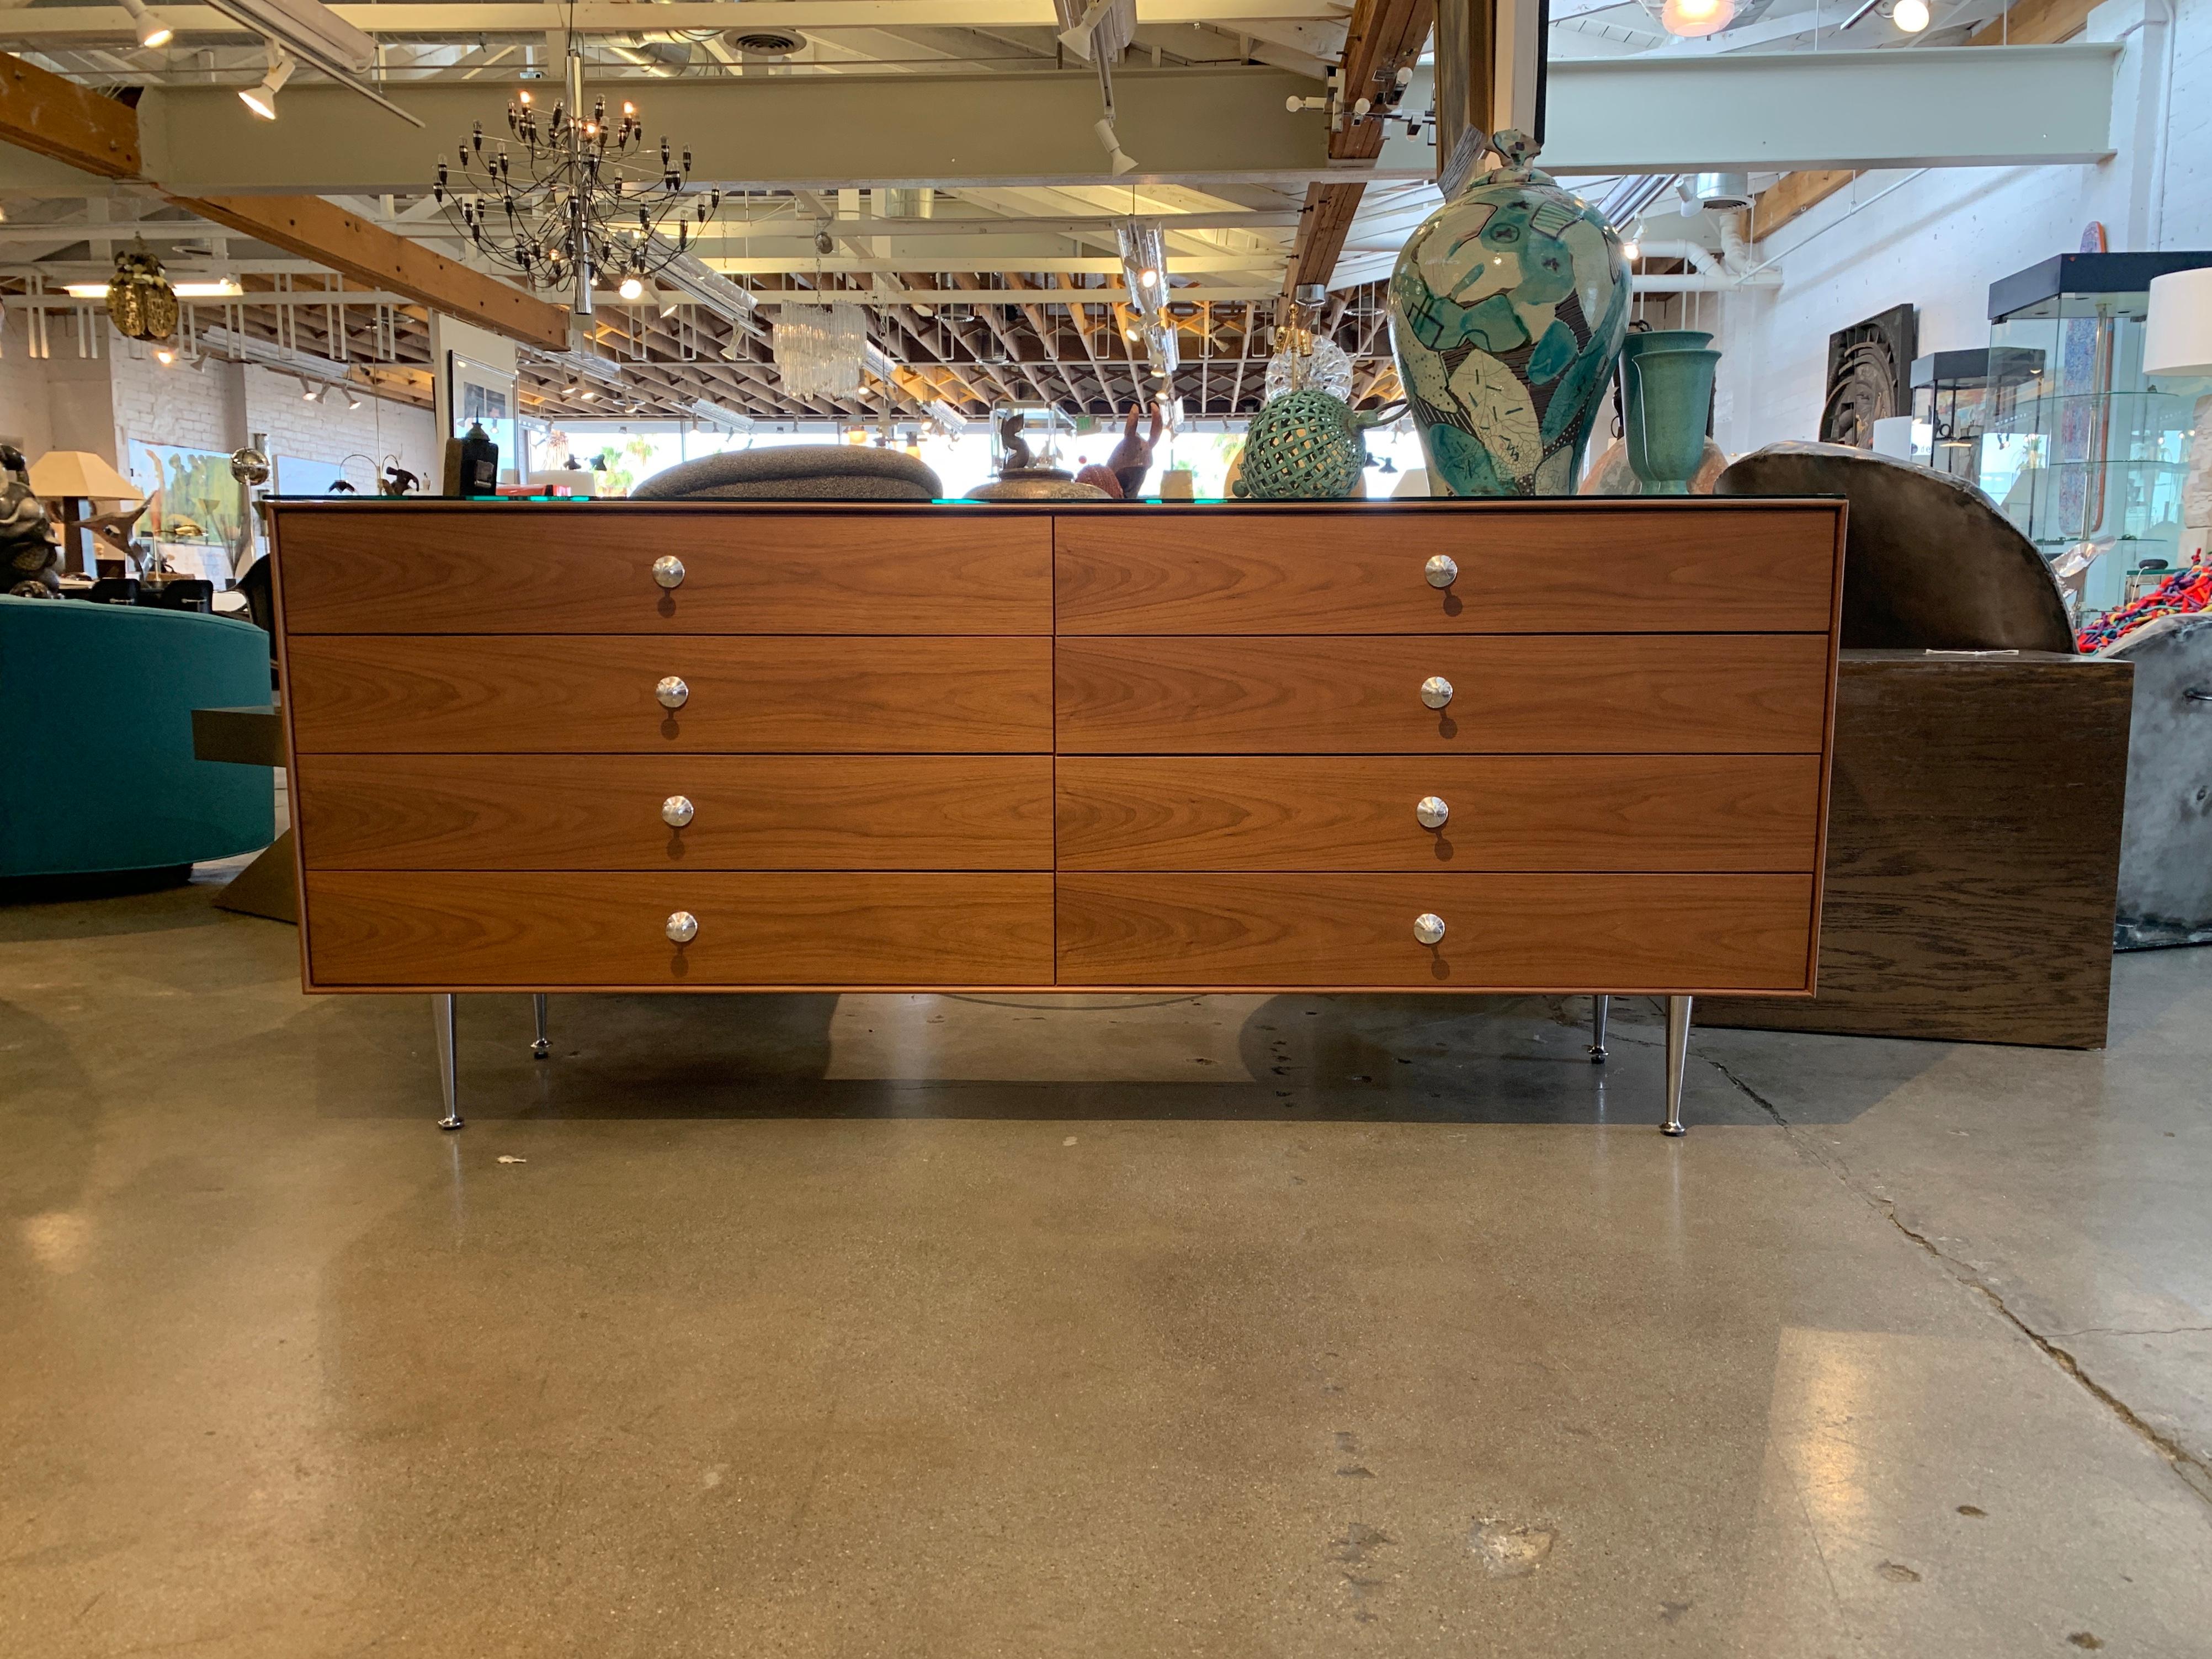 A nice example of a Classic George Nelson Design in walnut, this Thin edge chest produced by Herman Miller dates to 2017. Comes with labels and a certificate, which is pictured.